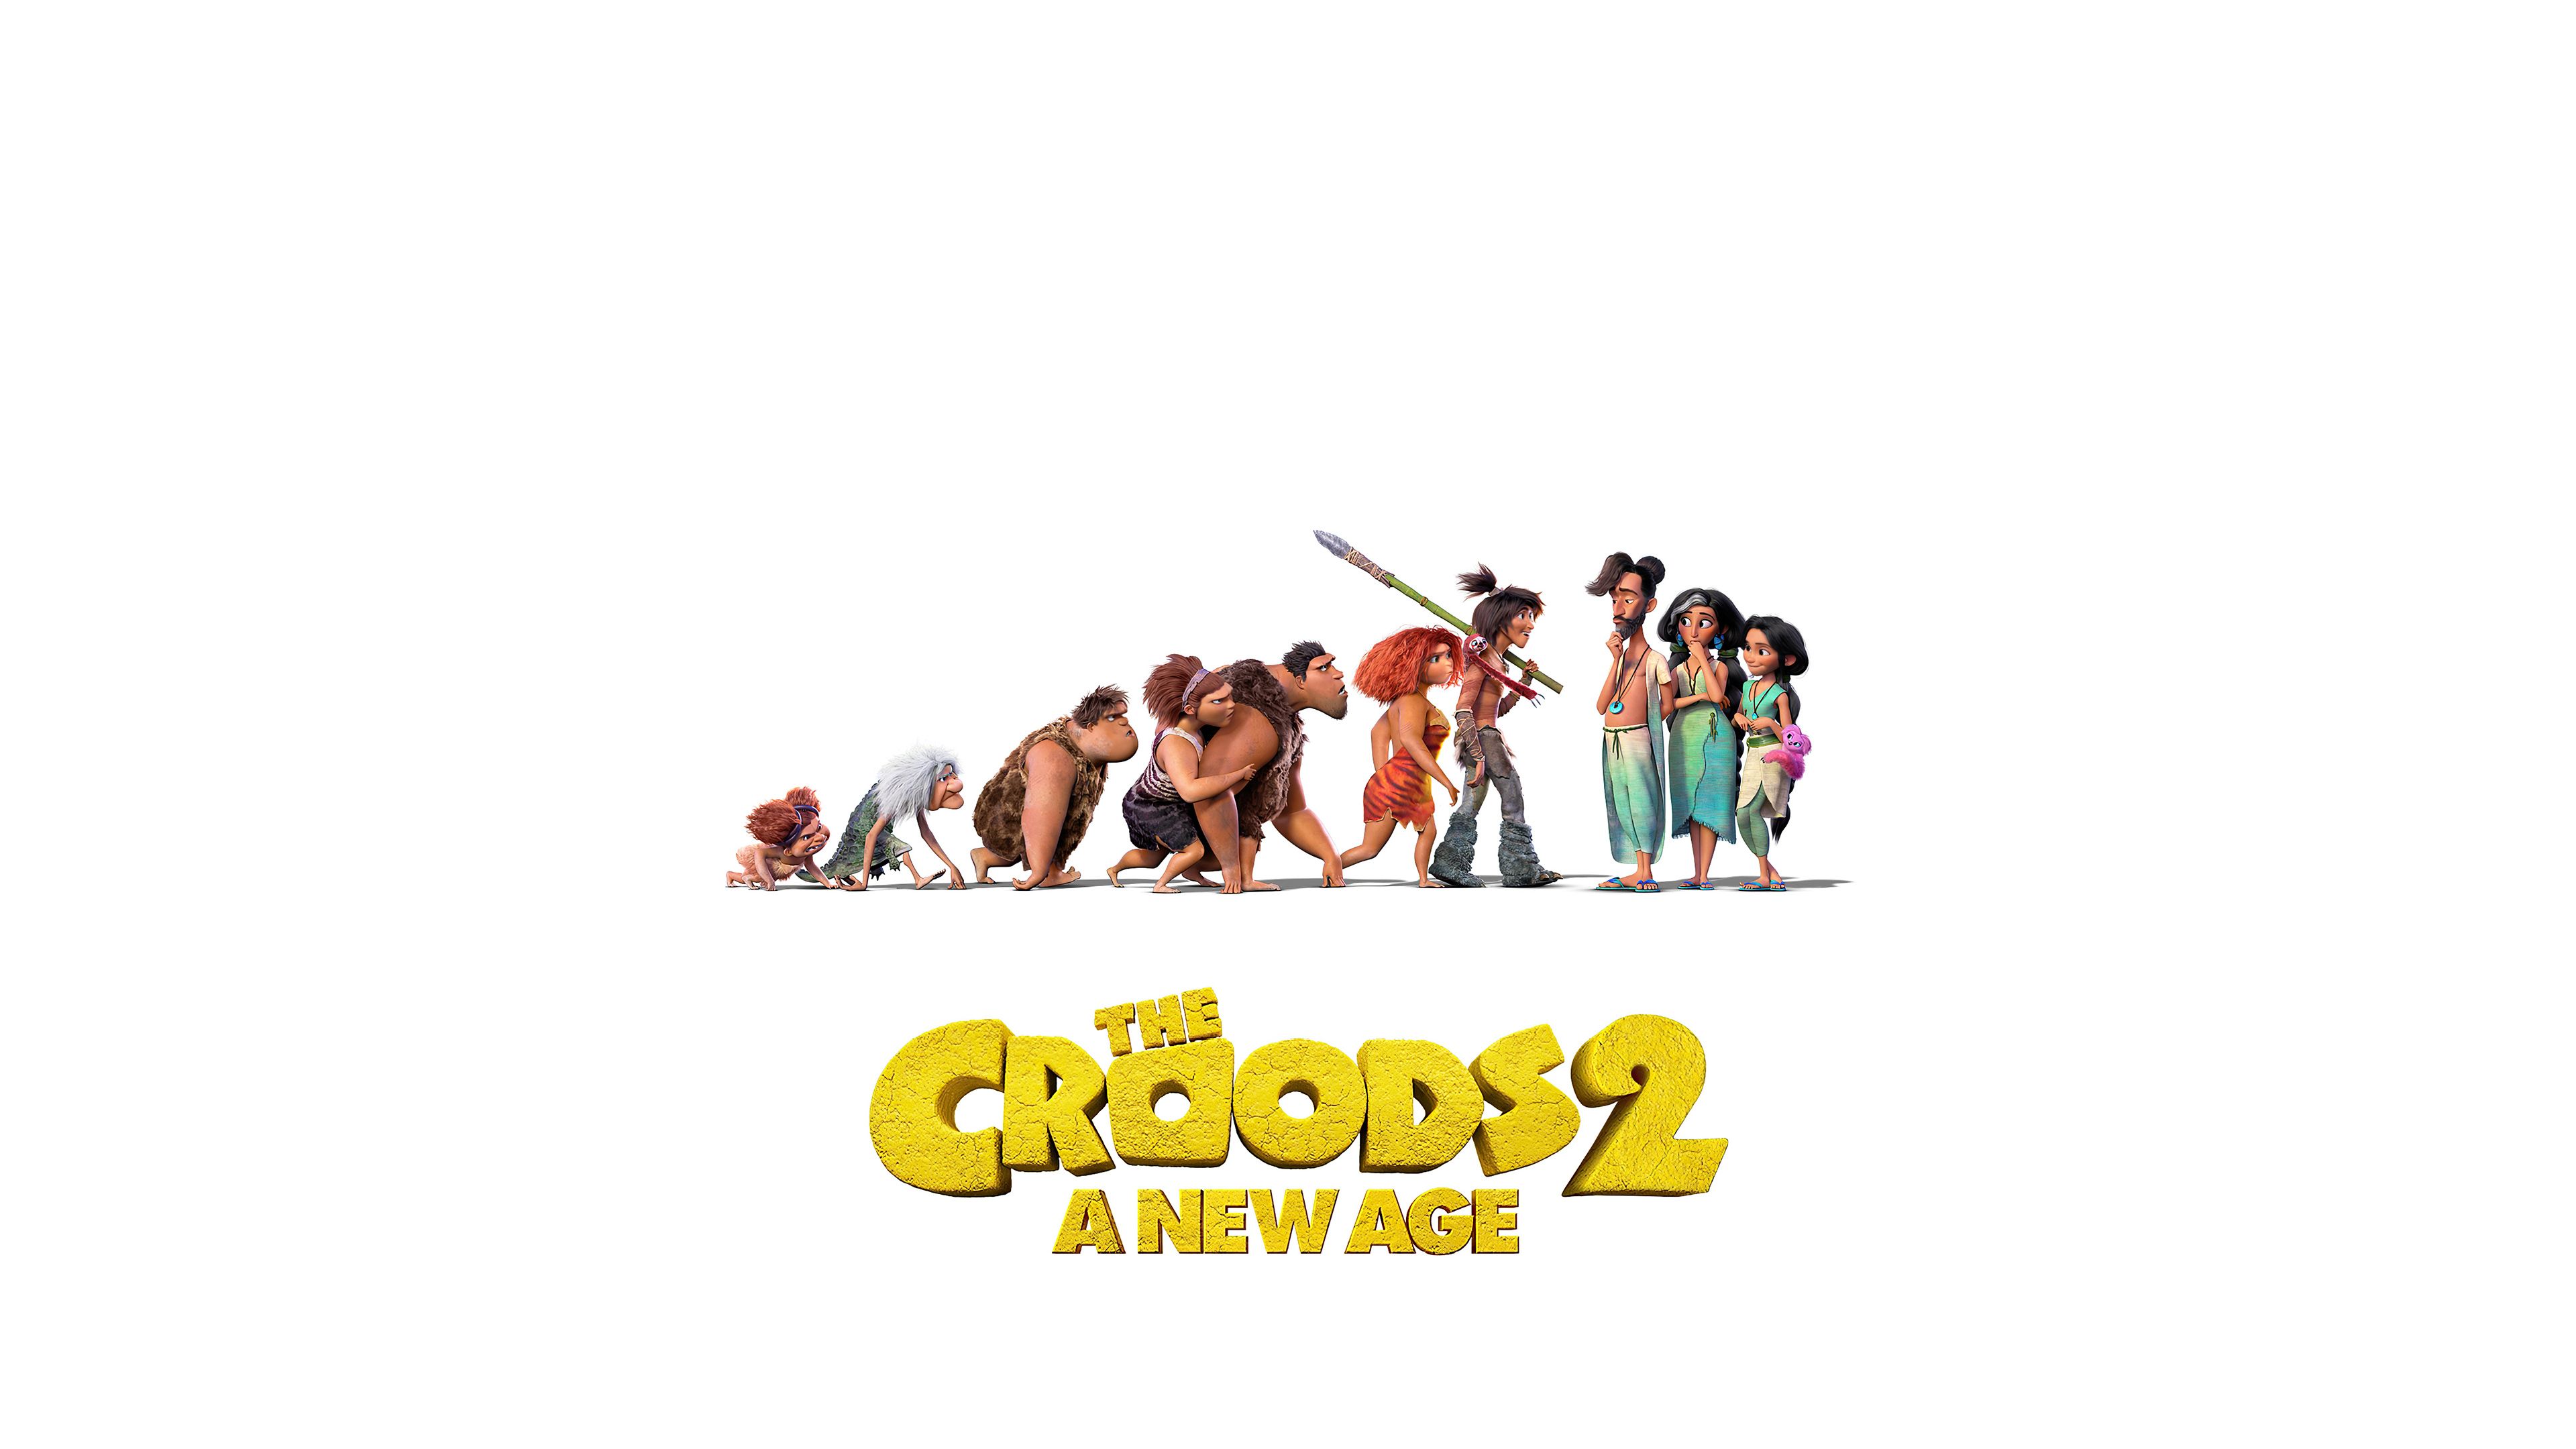 General 3840x2160 The Croods The Croods 2: A New Age animation movies Dreamworks